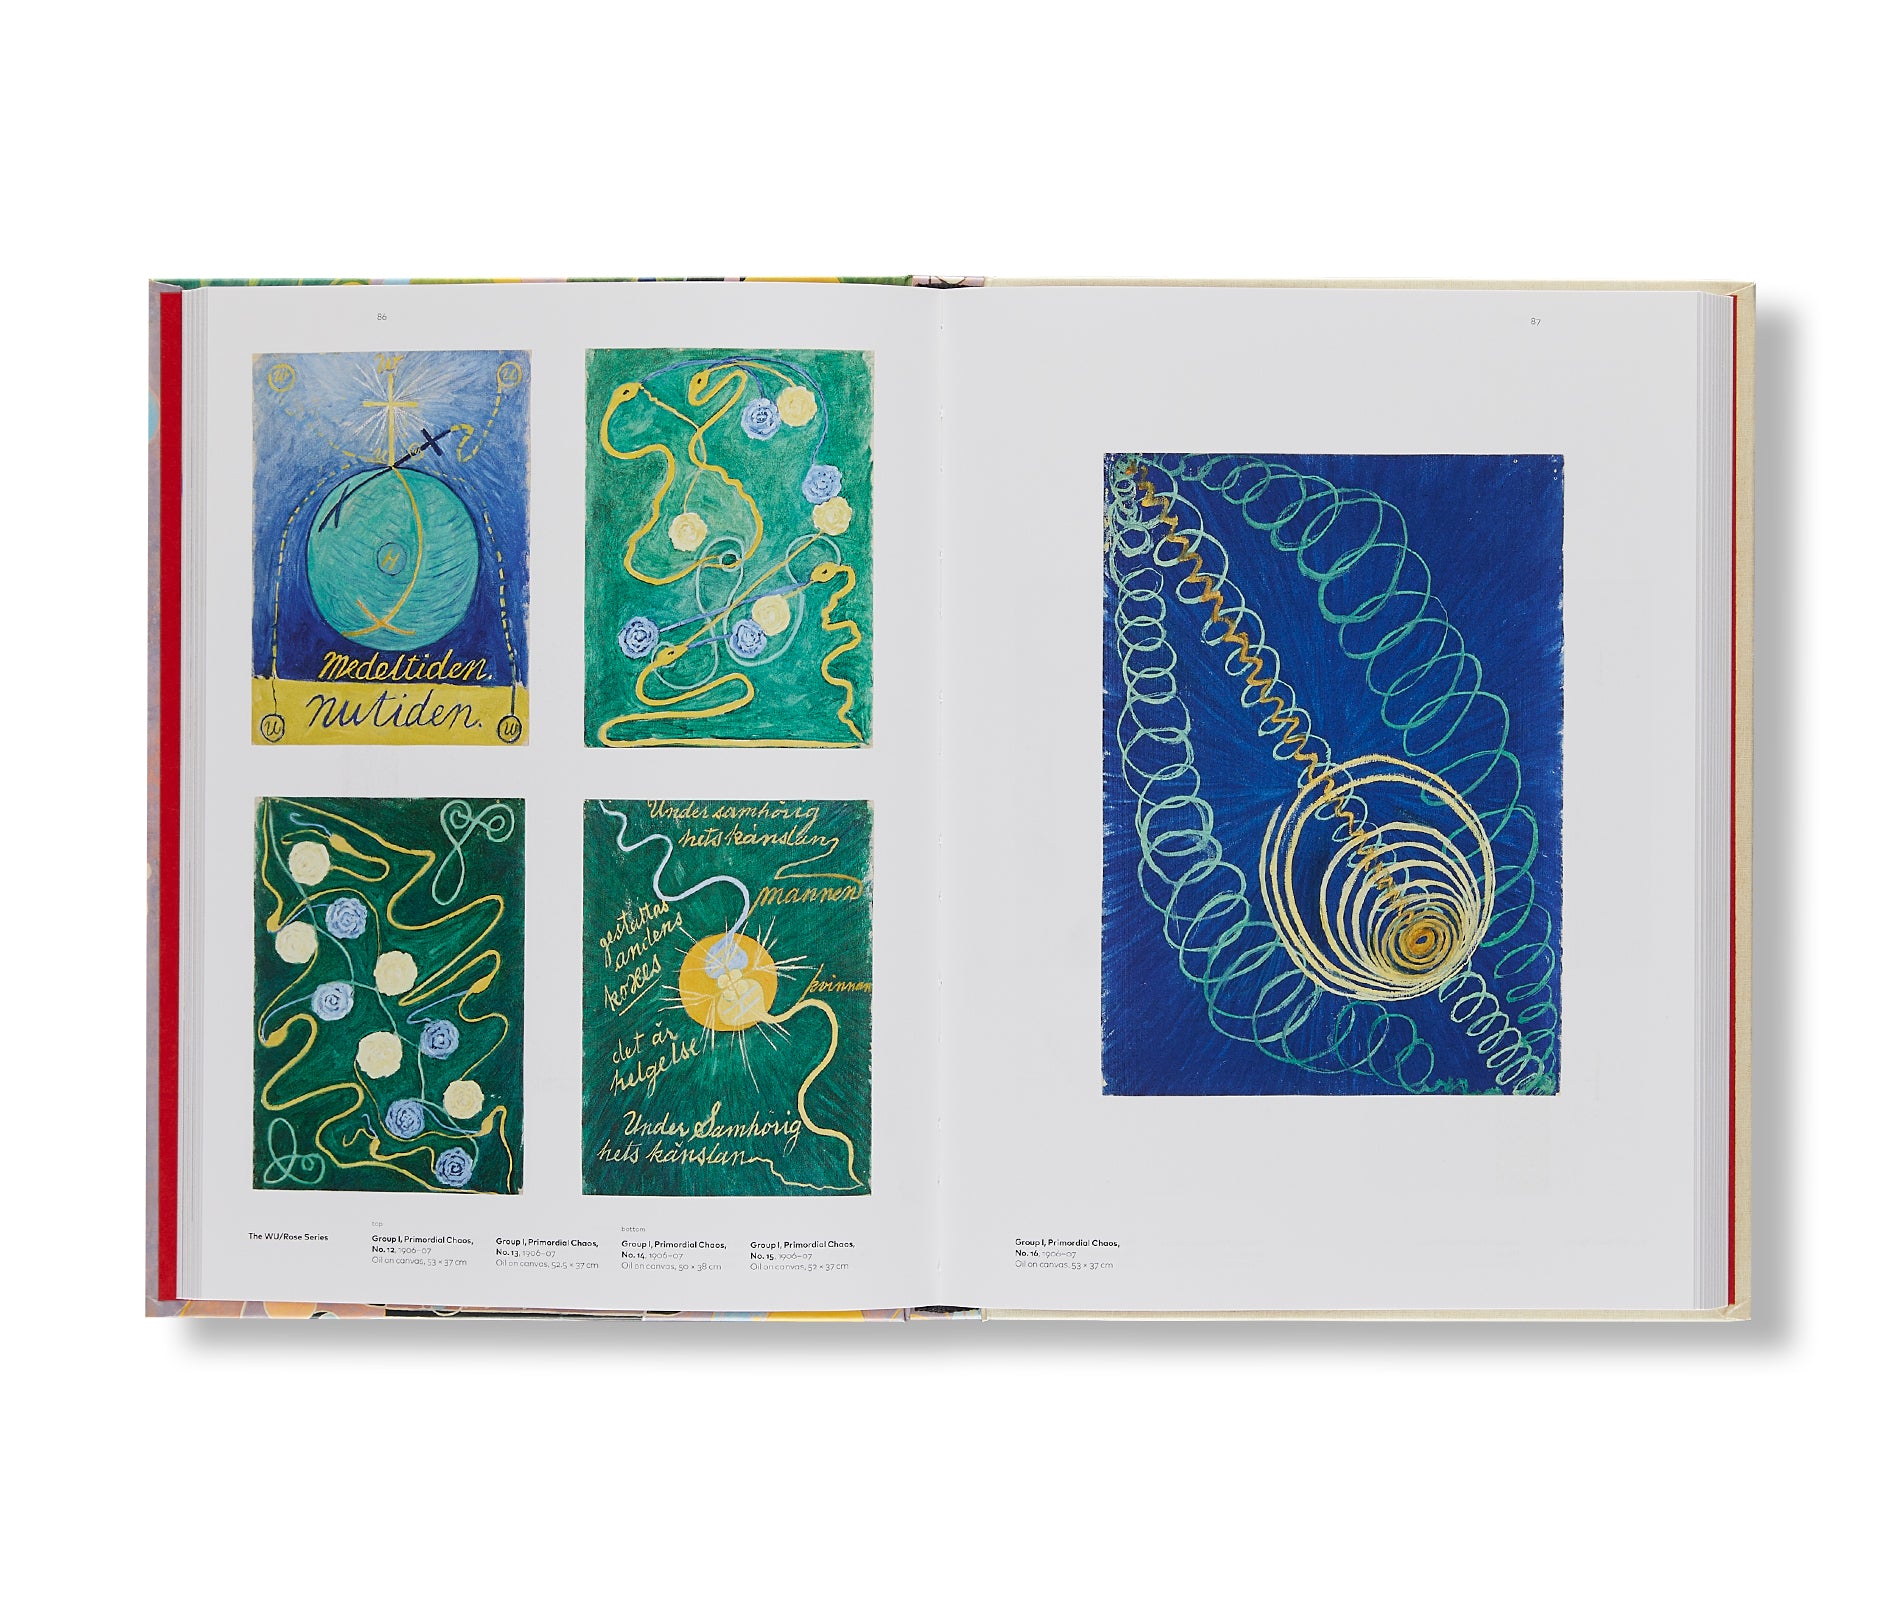 PAINTINGS FOR THE FUTURE by Hilma af Klint